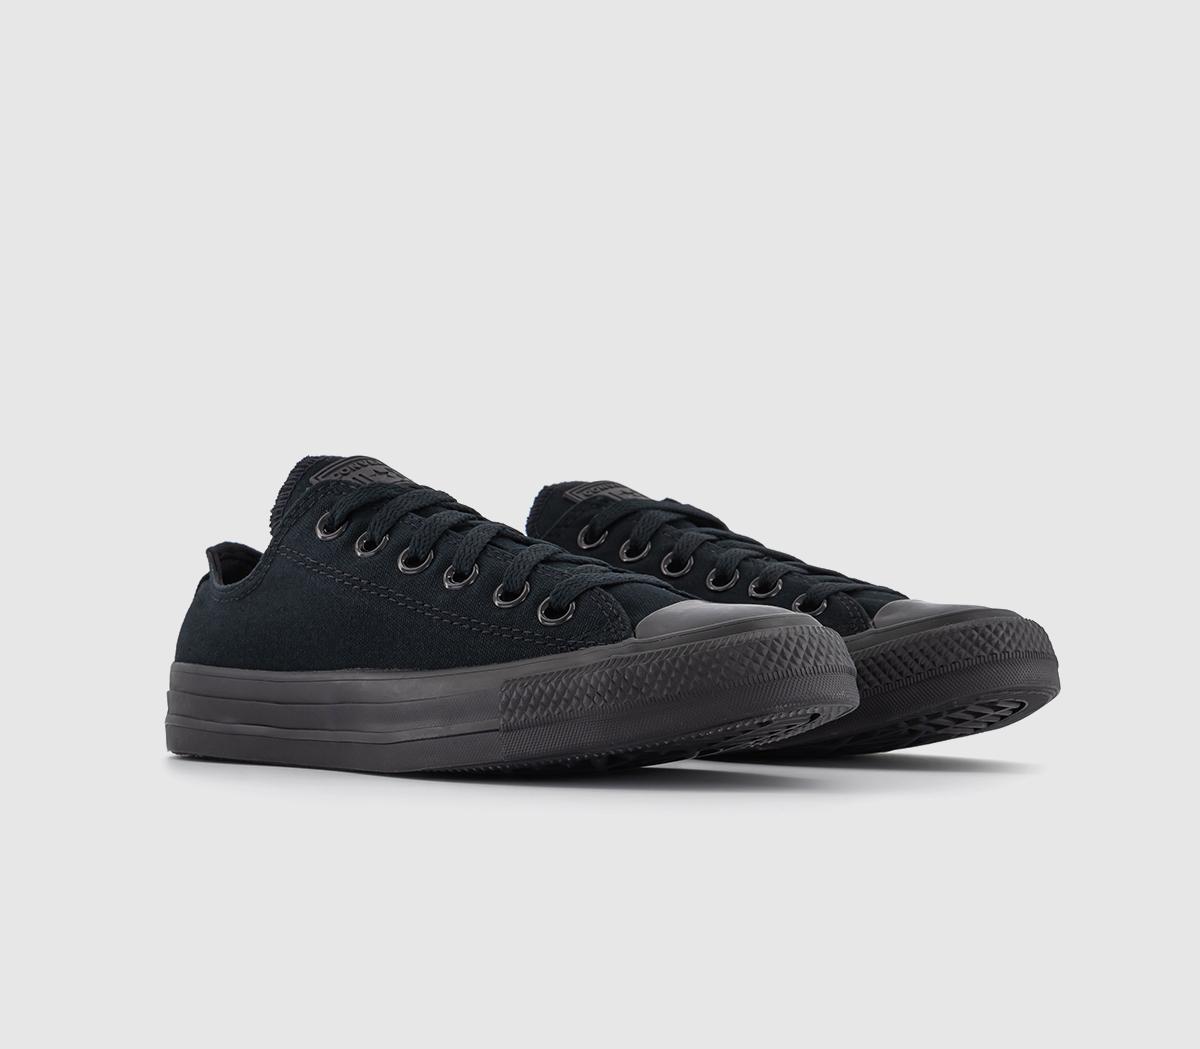 Converse Black All Star Low Monochrome Canvas Trainers, 6.5